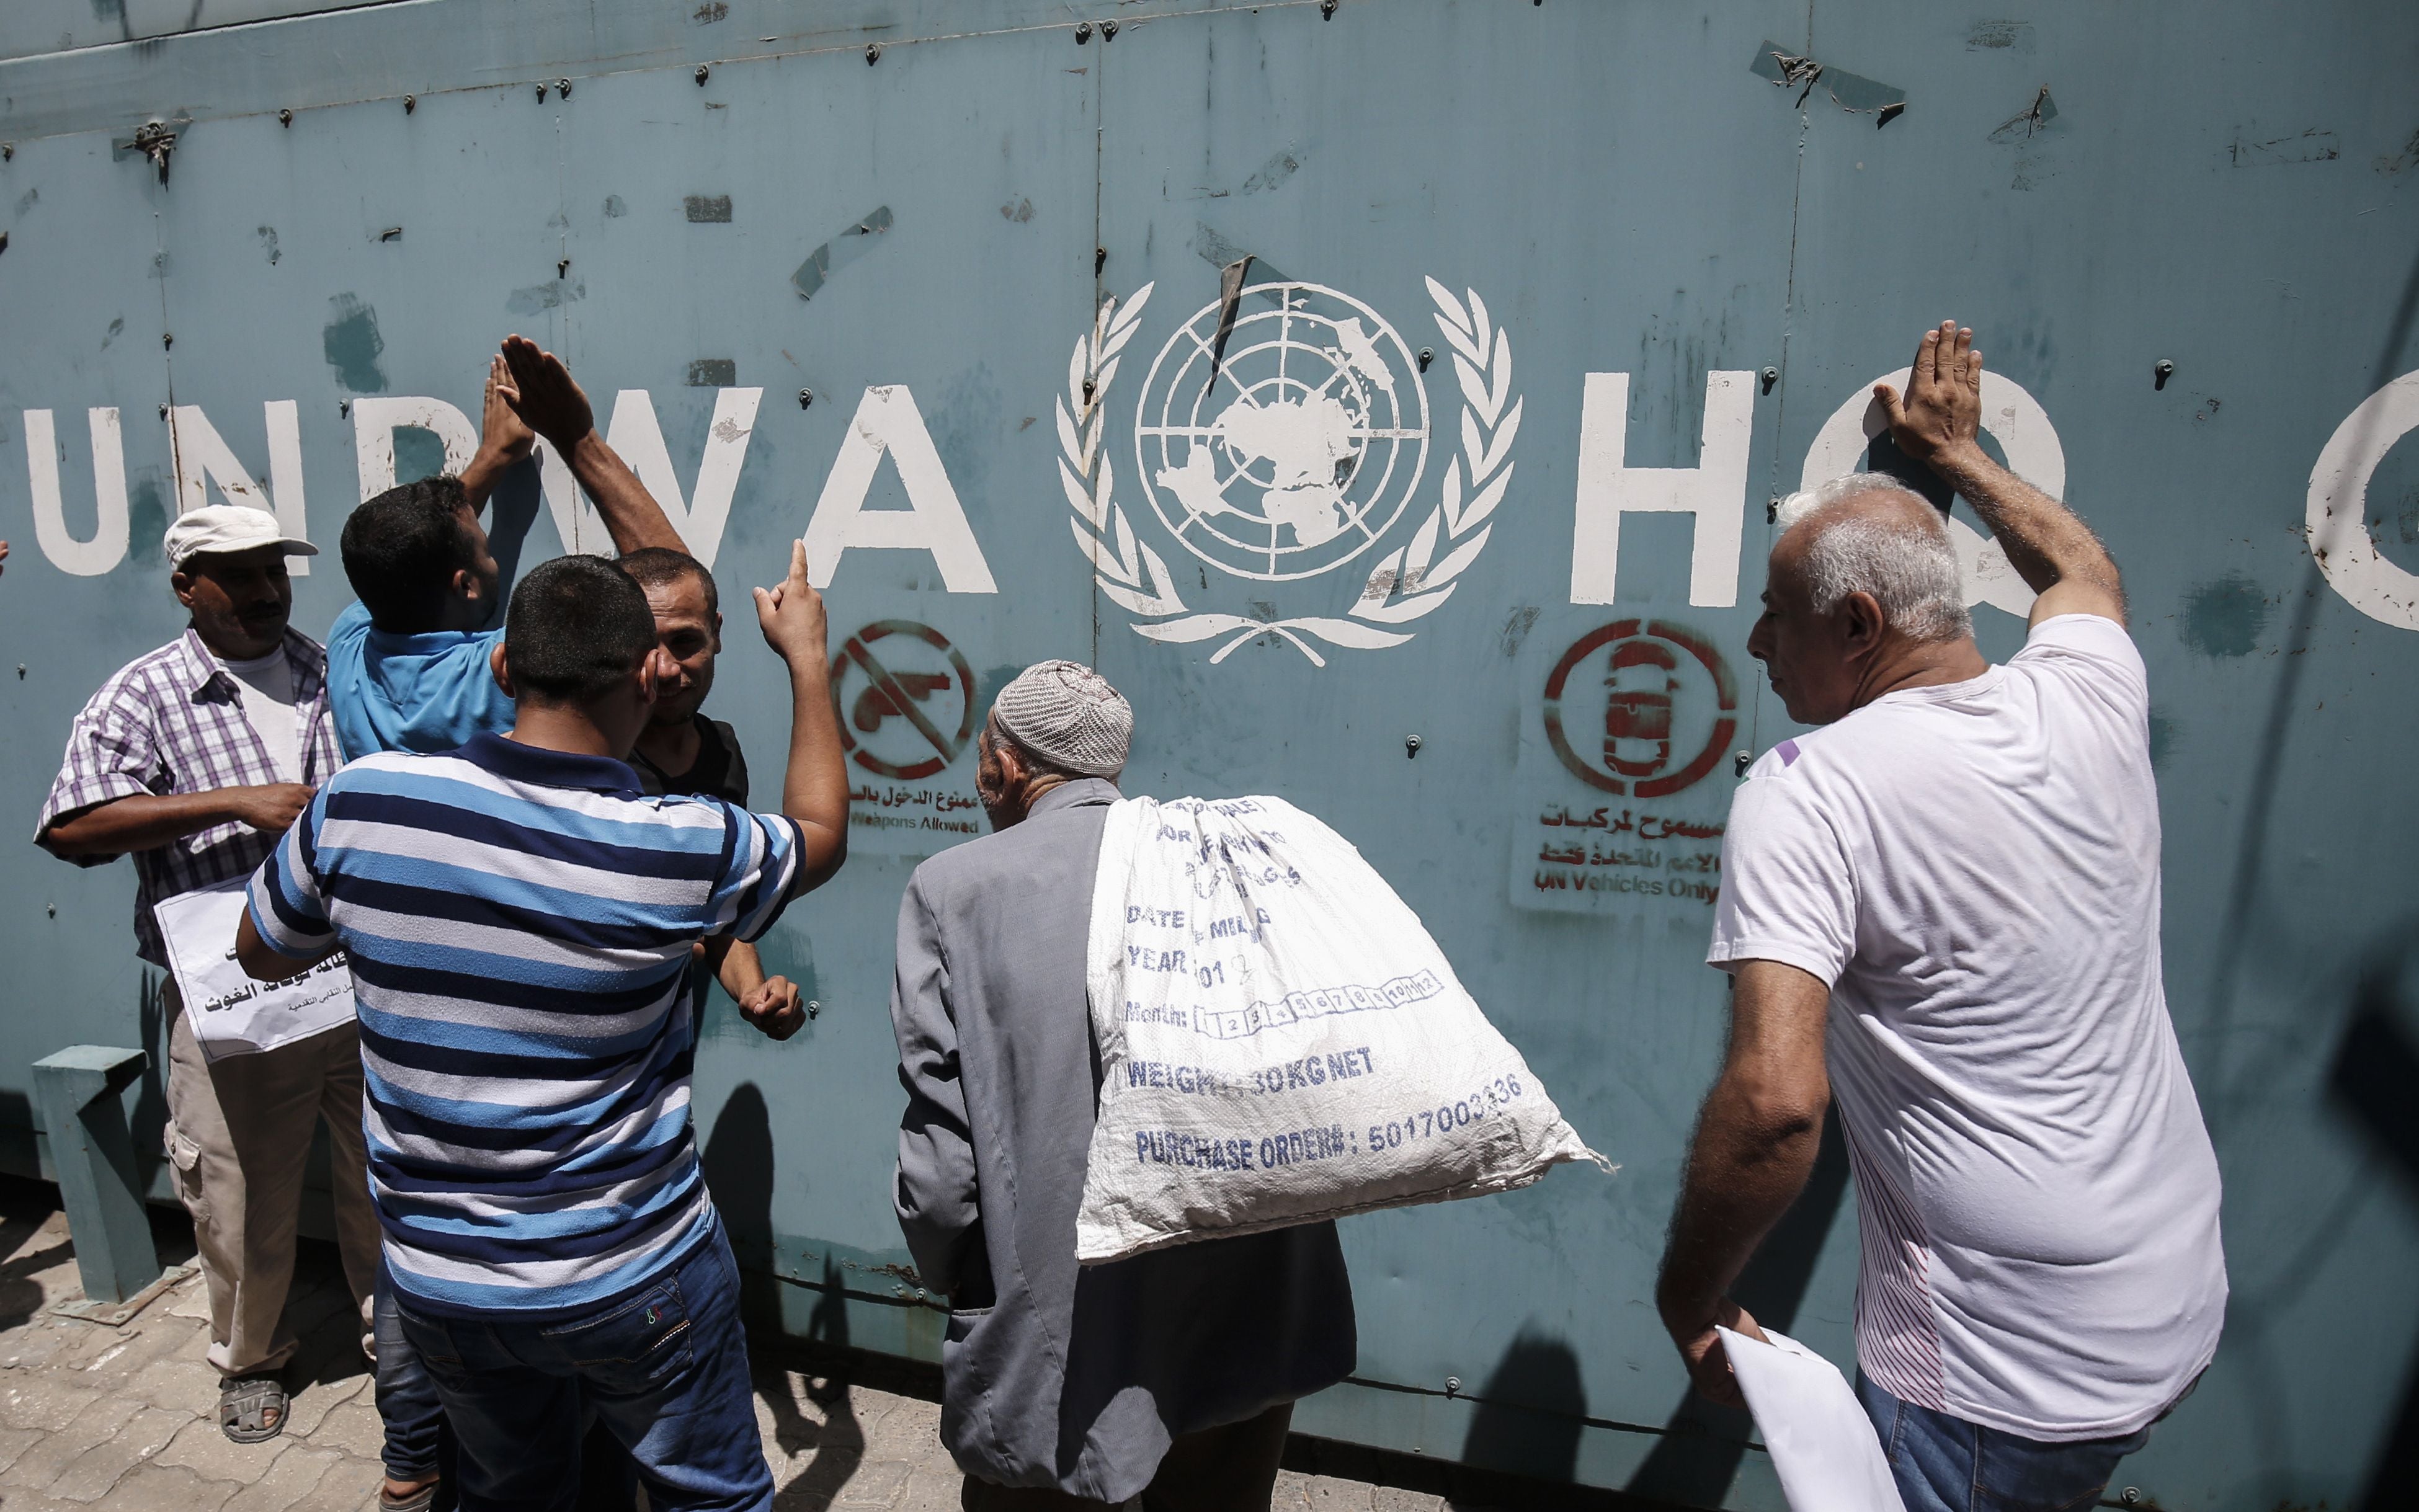 About 1.7 million people have been displaced from their homes in Gaza and forced to flee to humanitarian shelters, some of which are run by UNRWA